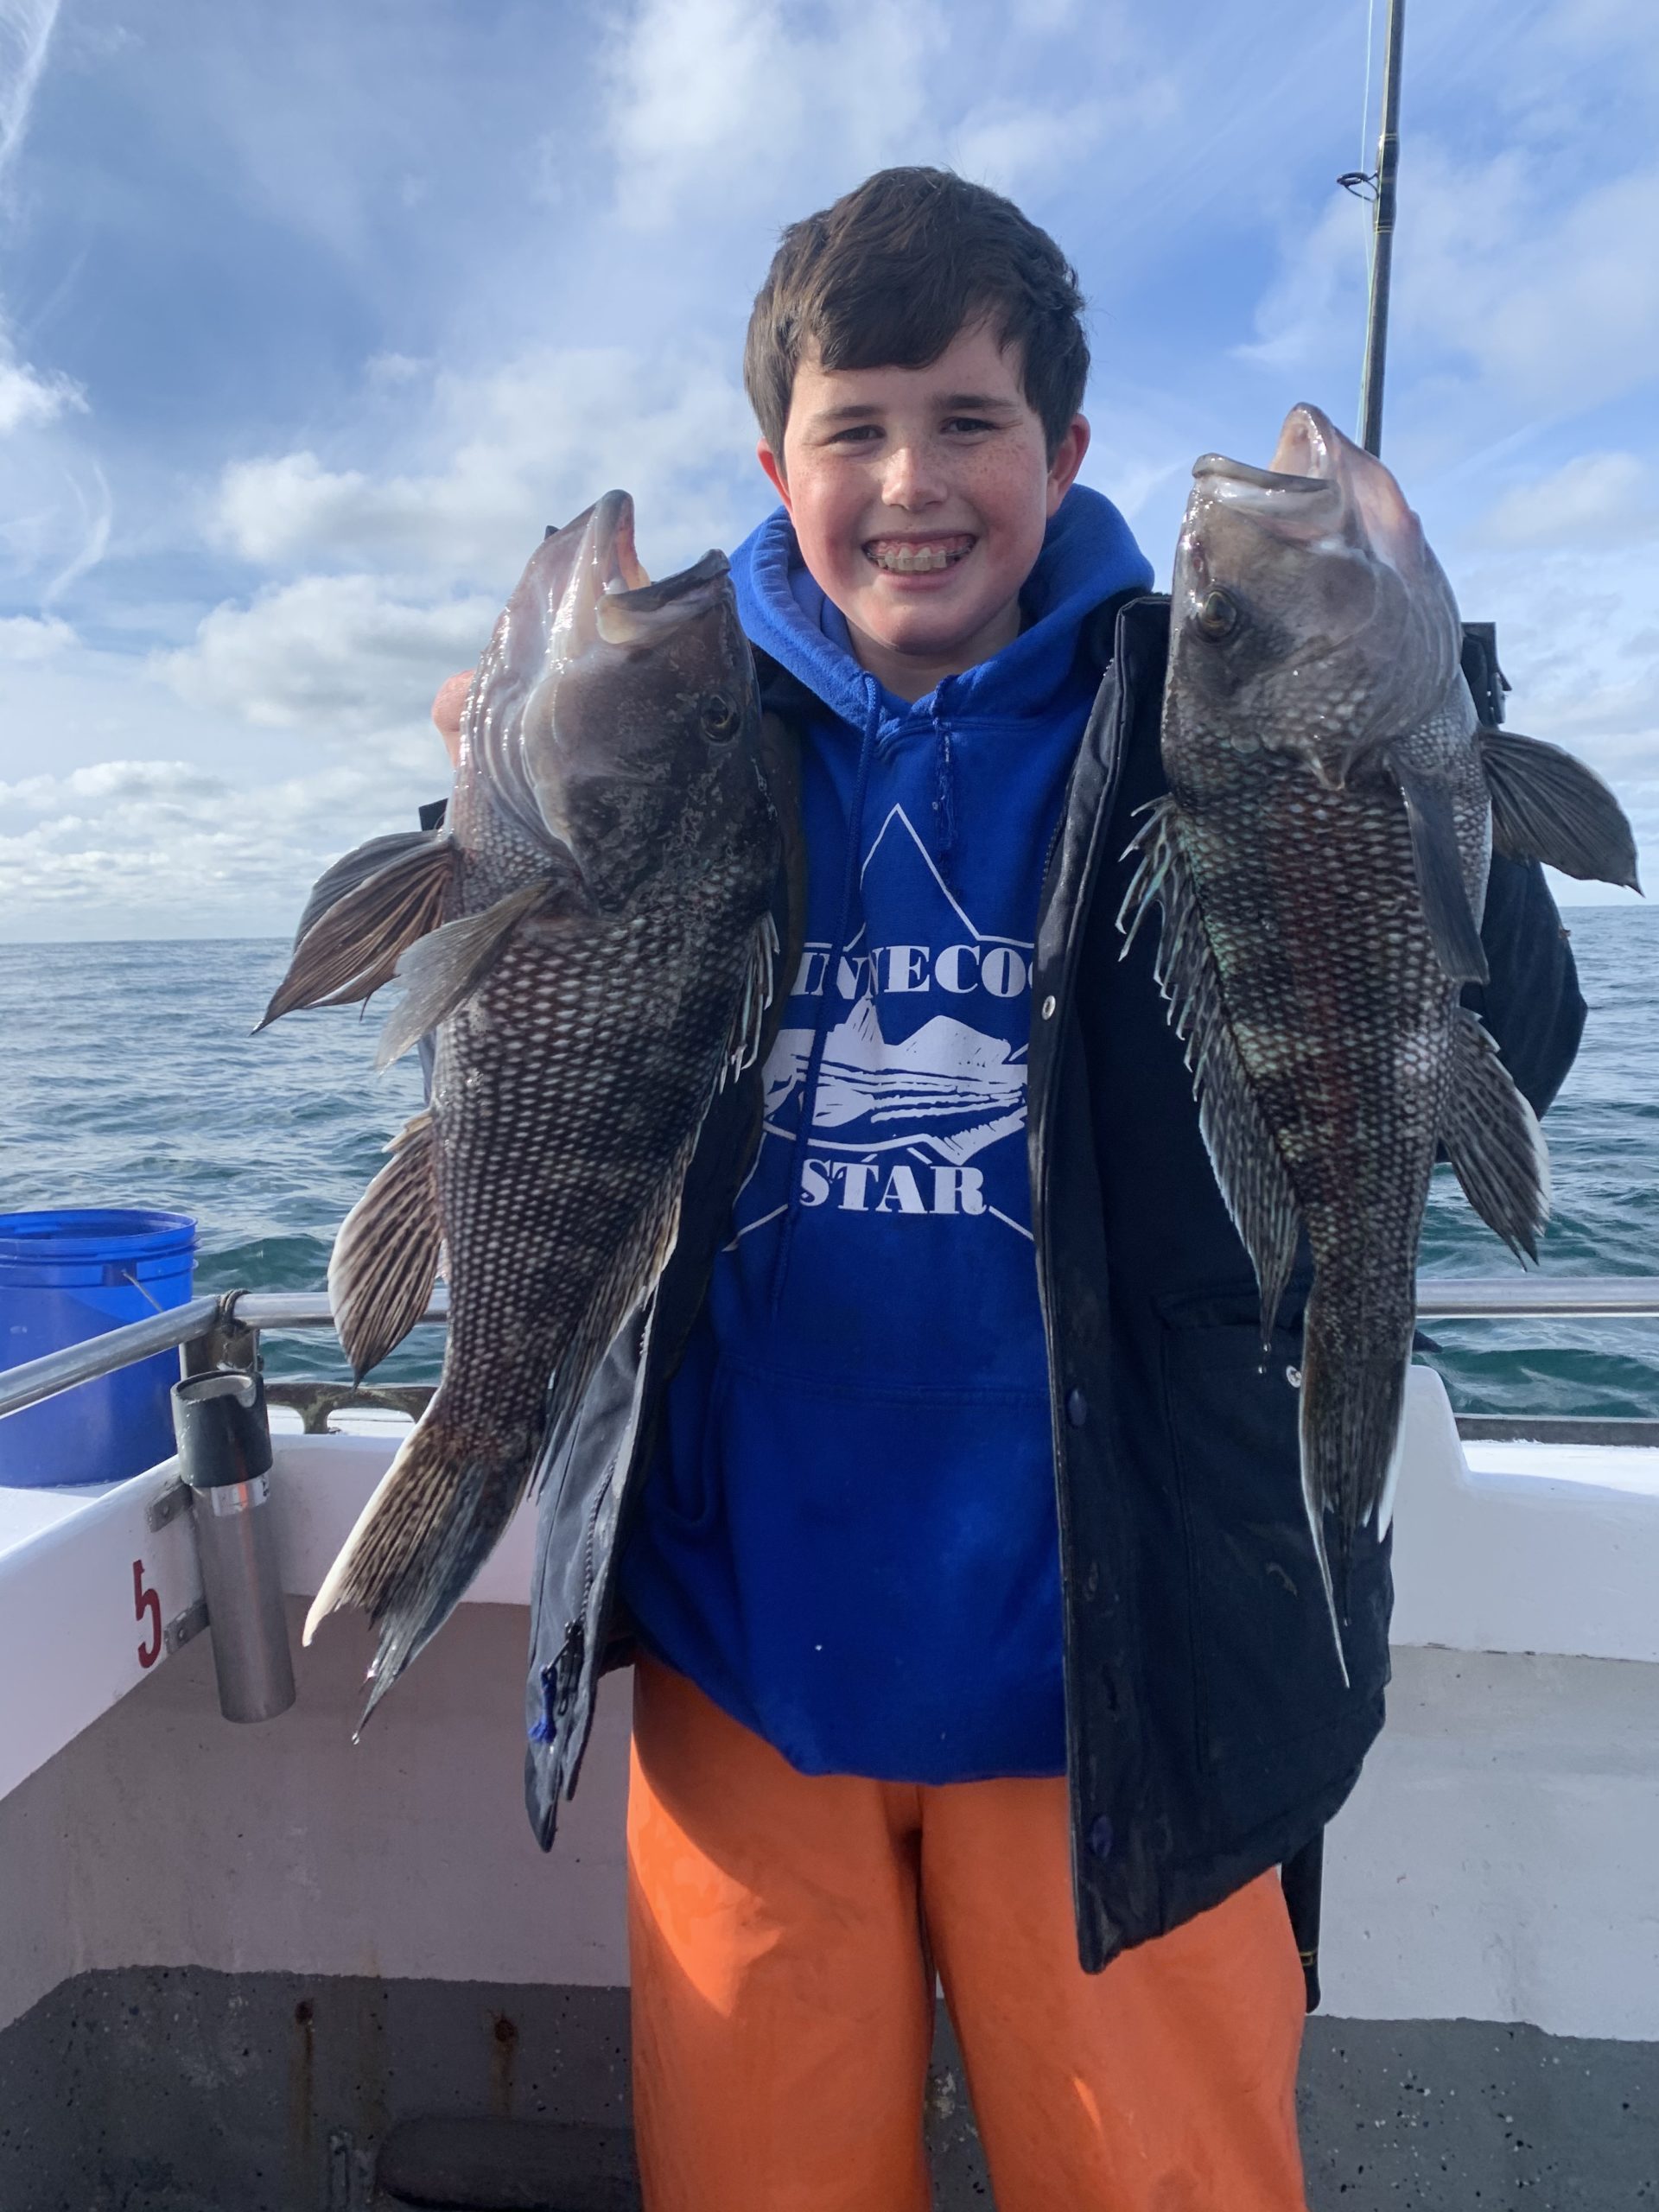 Kevin Kelly decked a couple of big black sea bass while fishing on the Shinnecock Star on Sunday.  Deena Lippman/Shinnecock Star